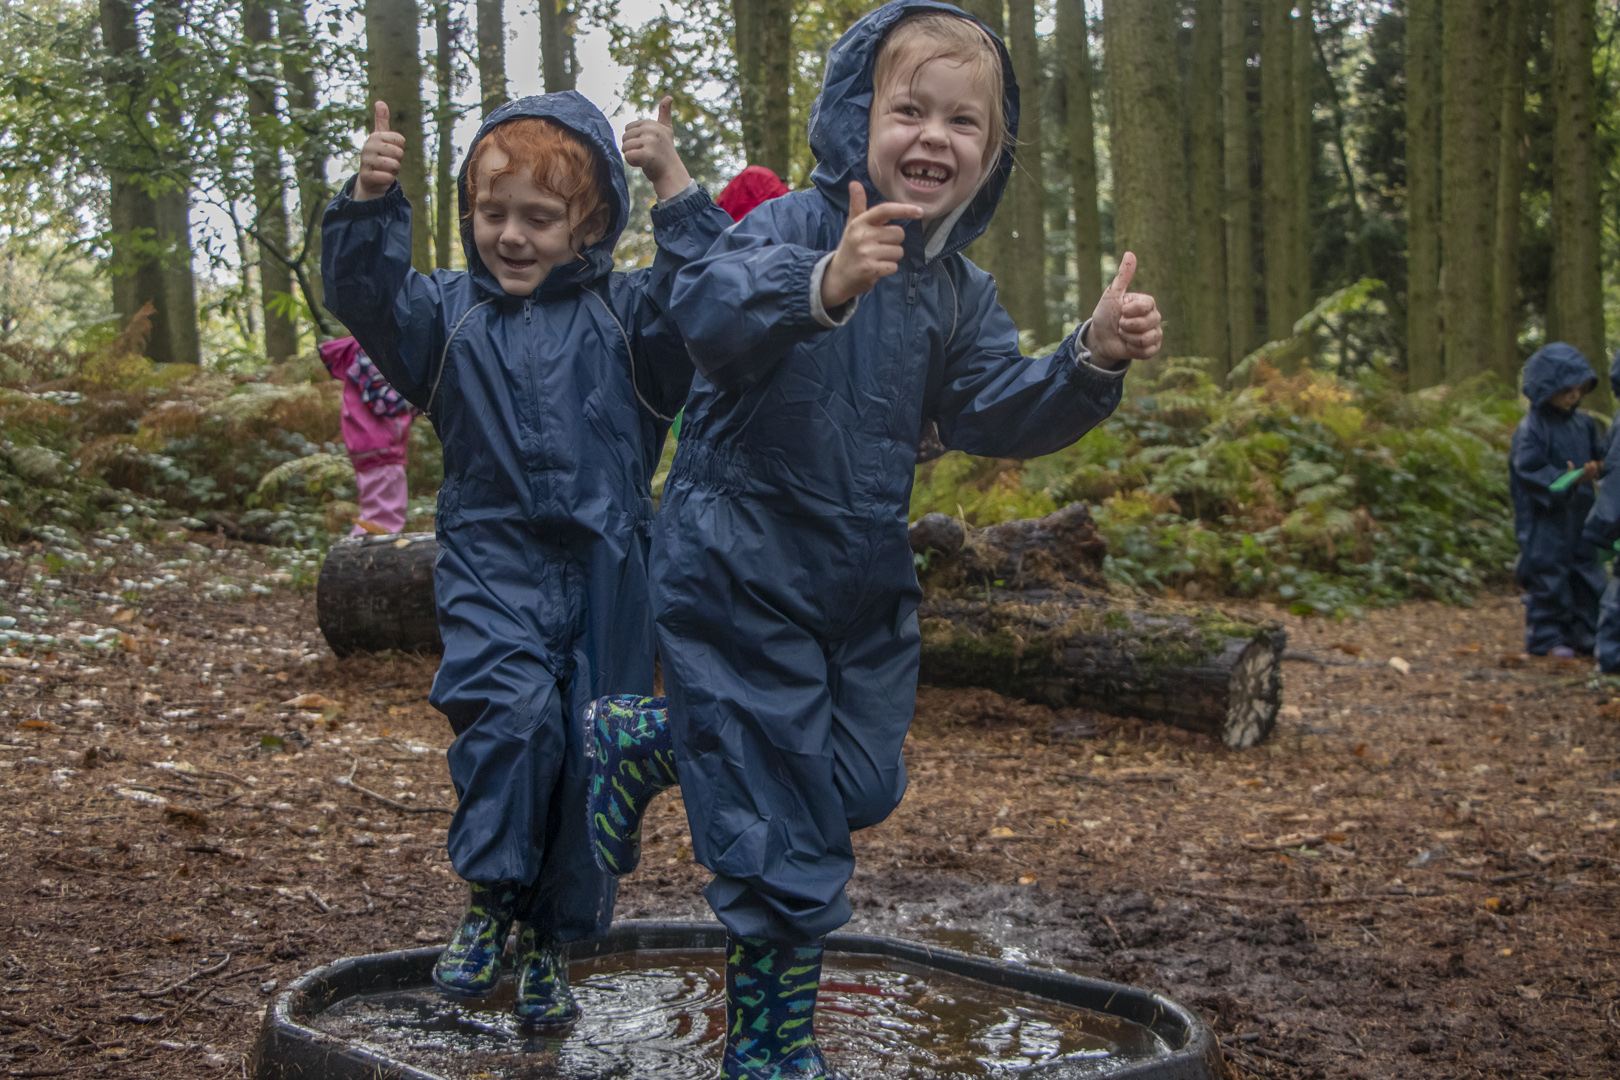 Knowsley Safari's 'Wild and Well' programme